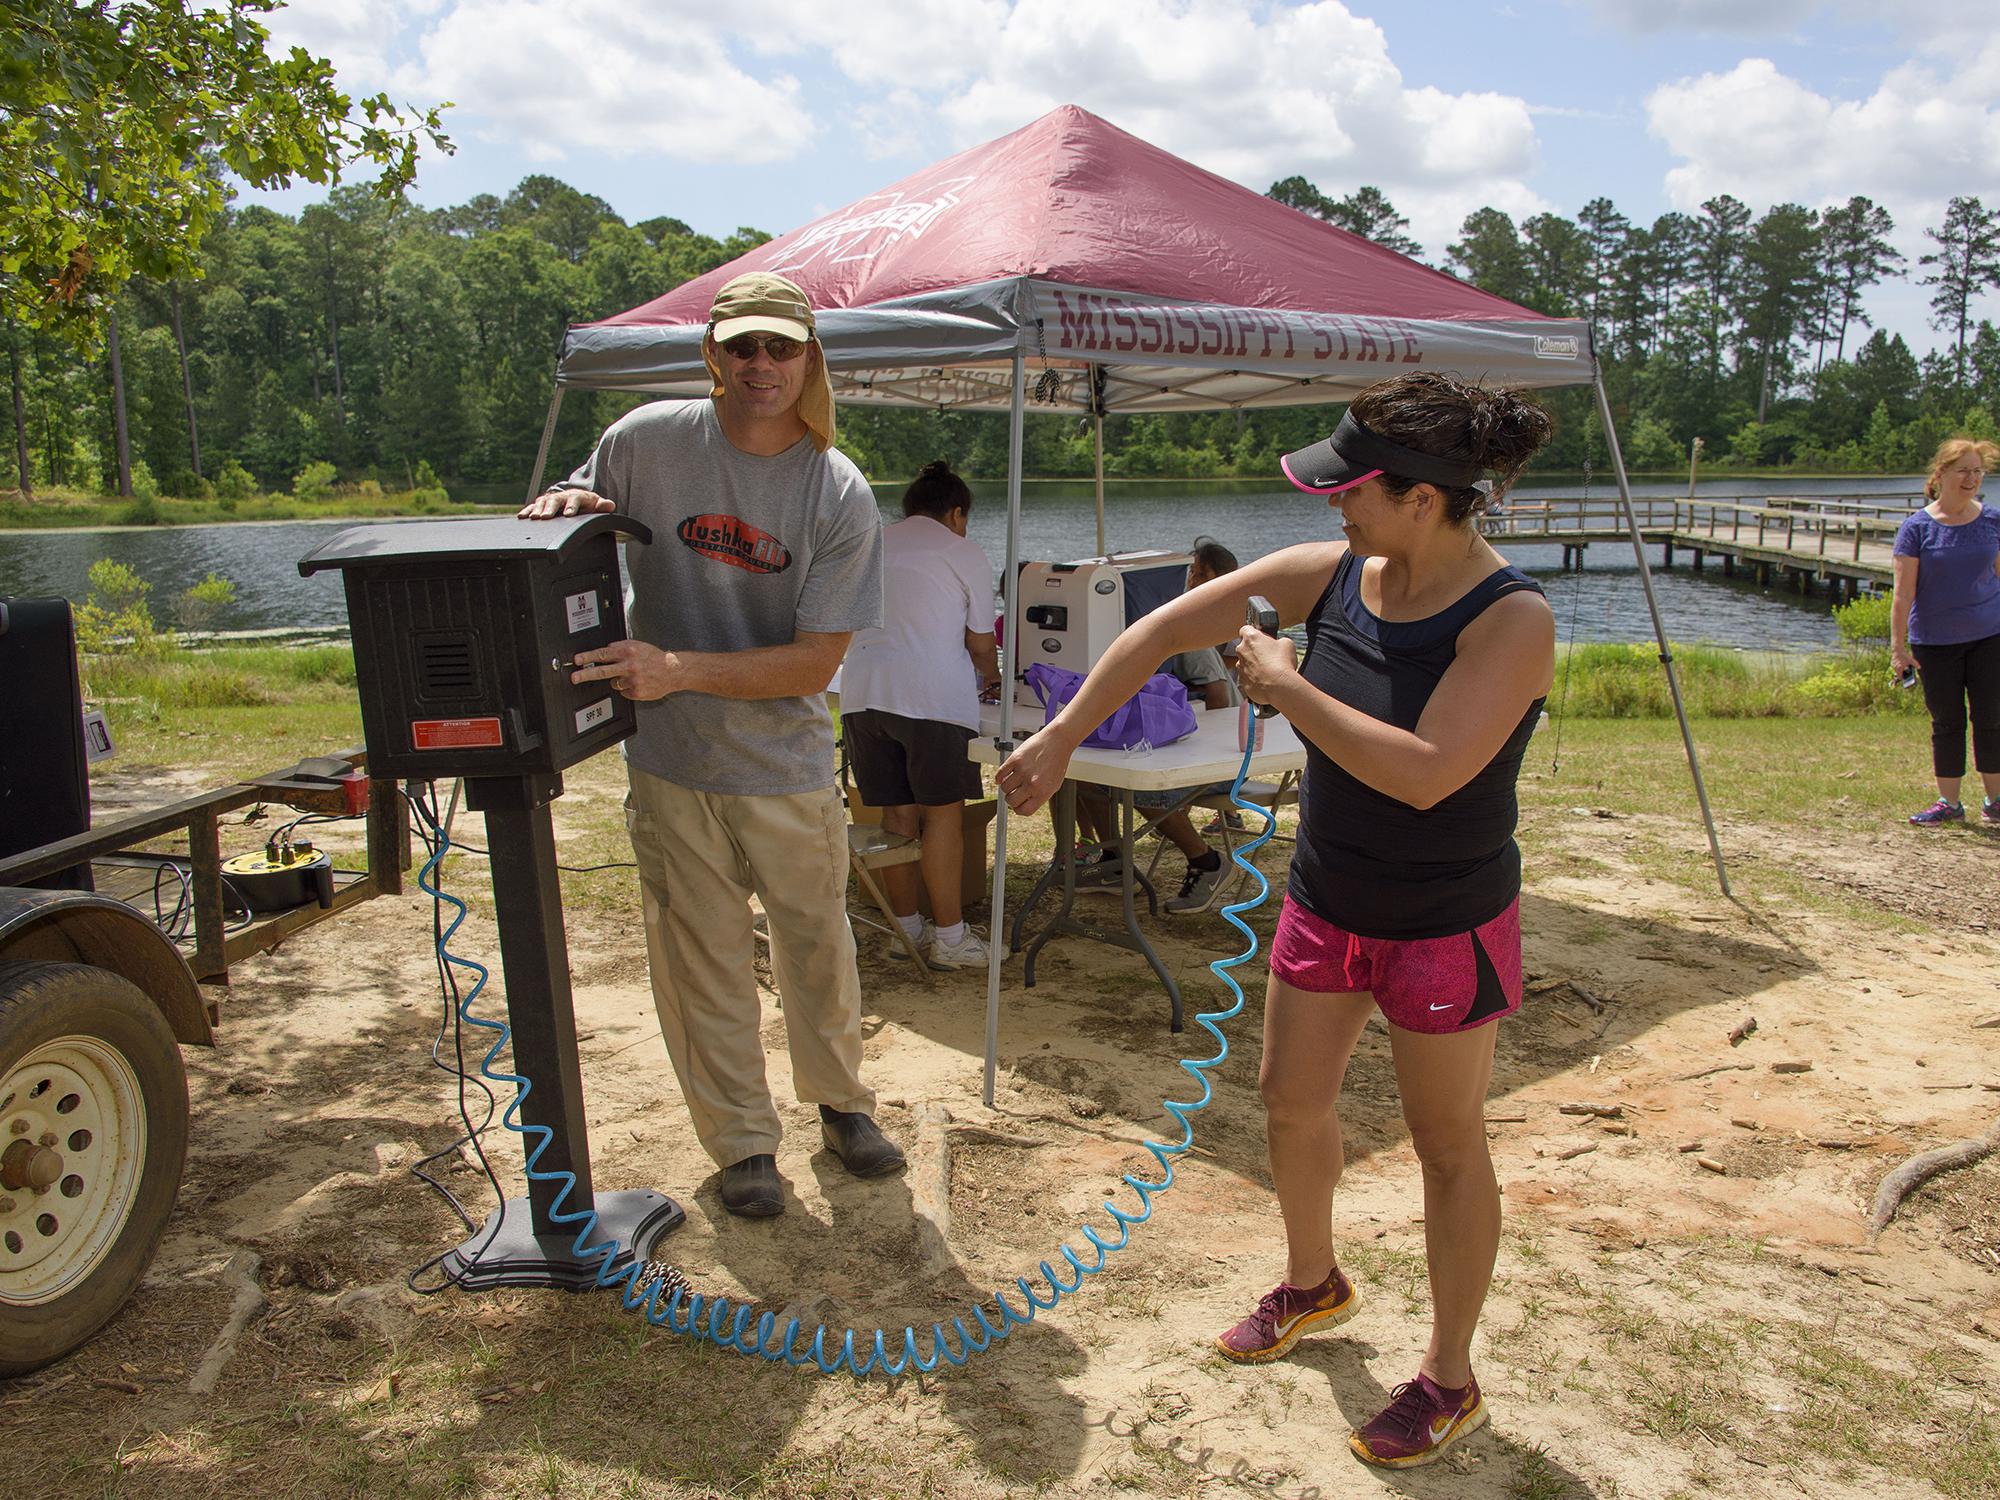 Jim McAdory, Mississippi State University Extension Service agent to the Mississippi Band of Choctaw Indians, shows Natasha Willis how to use the sunscreen dispenser provided by MSU Extension. The demonstration was part of a May 28 boating event in Neshoba County, Mississippi. (Photo by MSU Extension Service/Kevin Hudson)